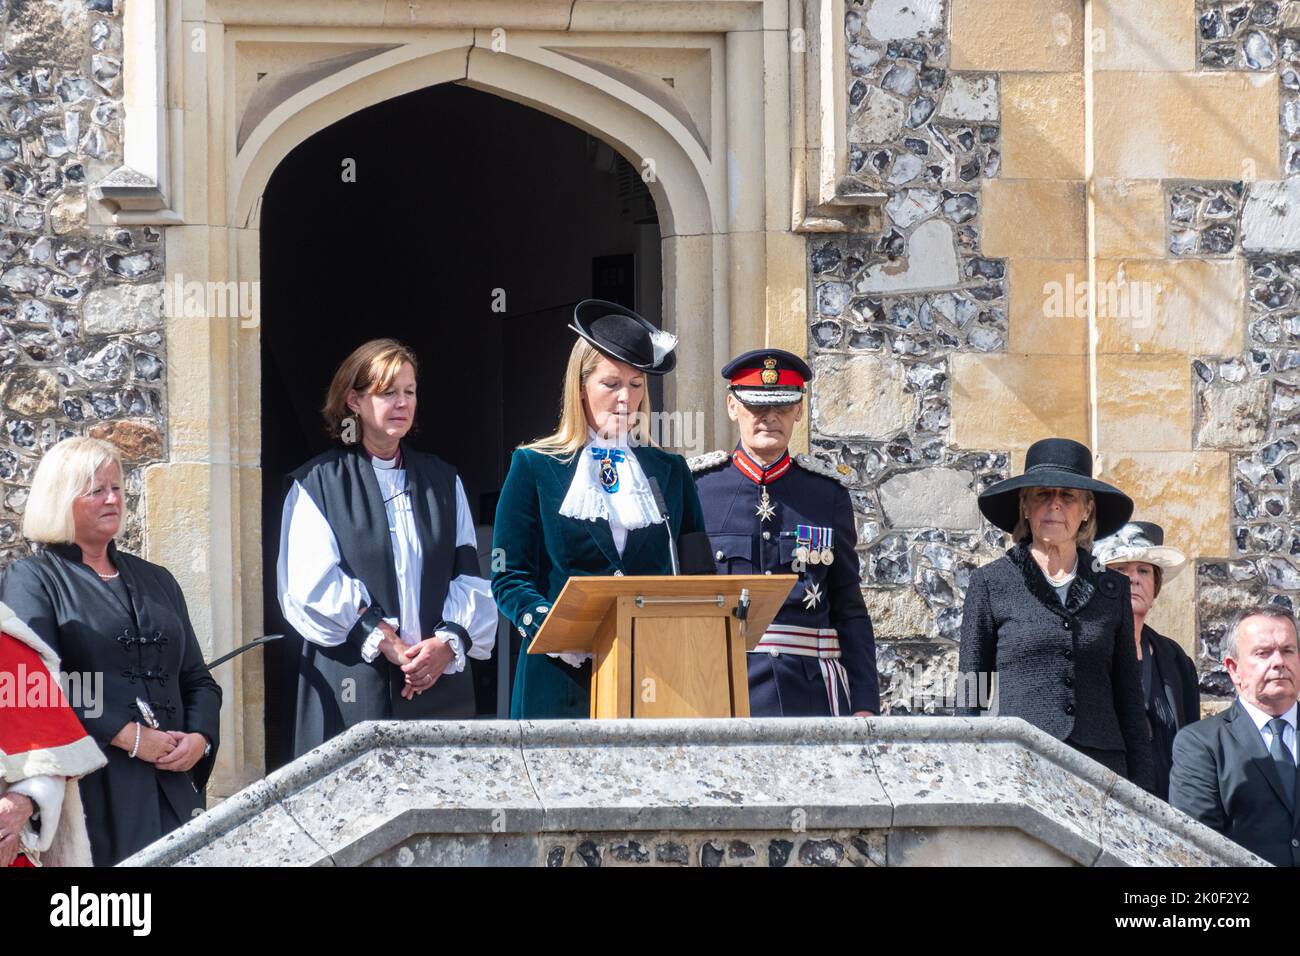 Winchester, Hampshire, UK. 11th September, 2022. The Proclamation of the Accession of King Charles III three days after the death of Queen Elizabeth II. The High Sheriff of Hampshire, Lady Edwina Grosvenor, accompanied by the Lord Lieutenant of Hampshire and other dignitaries, read the proclamation at 1pm outside The Great Hall in front of crowds of people. Stock Photo